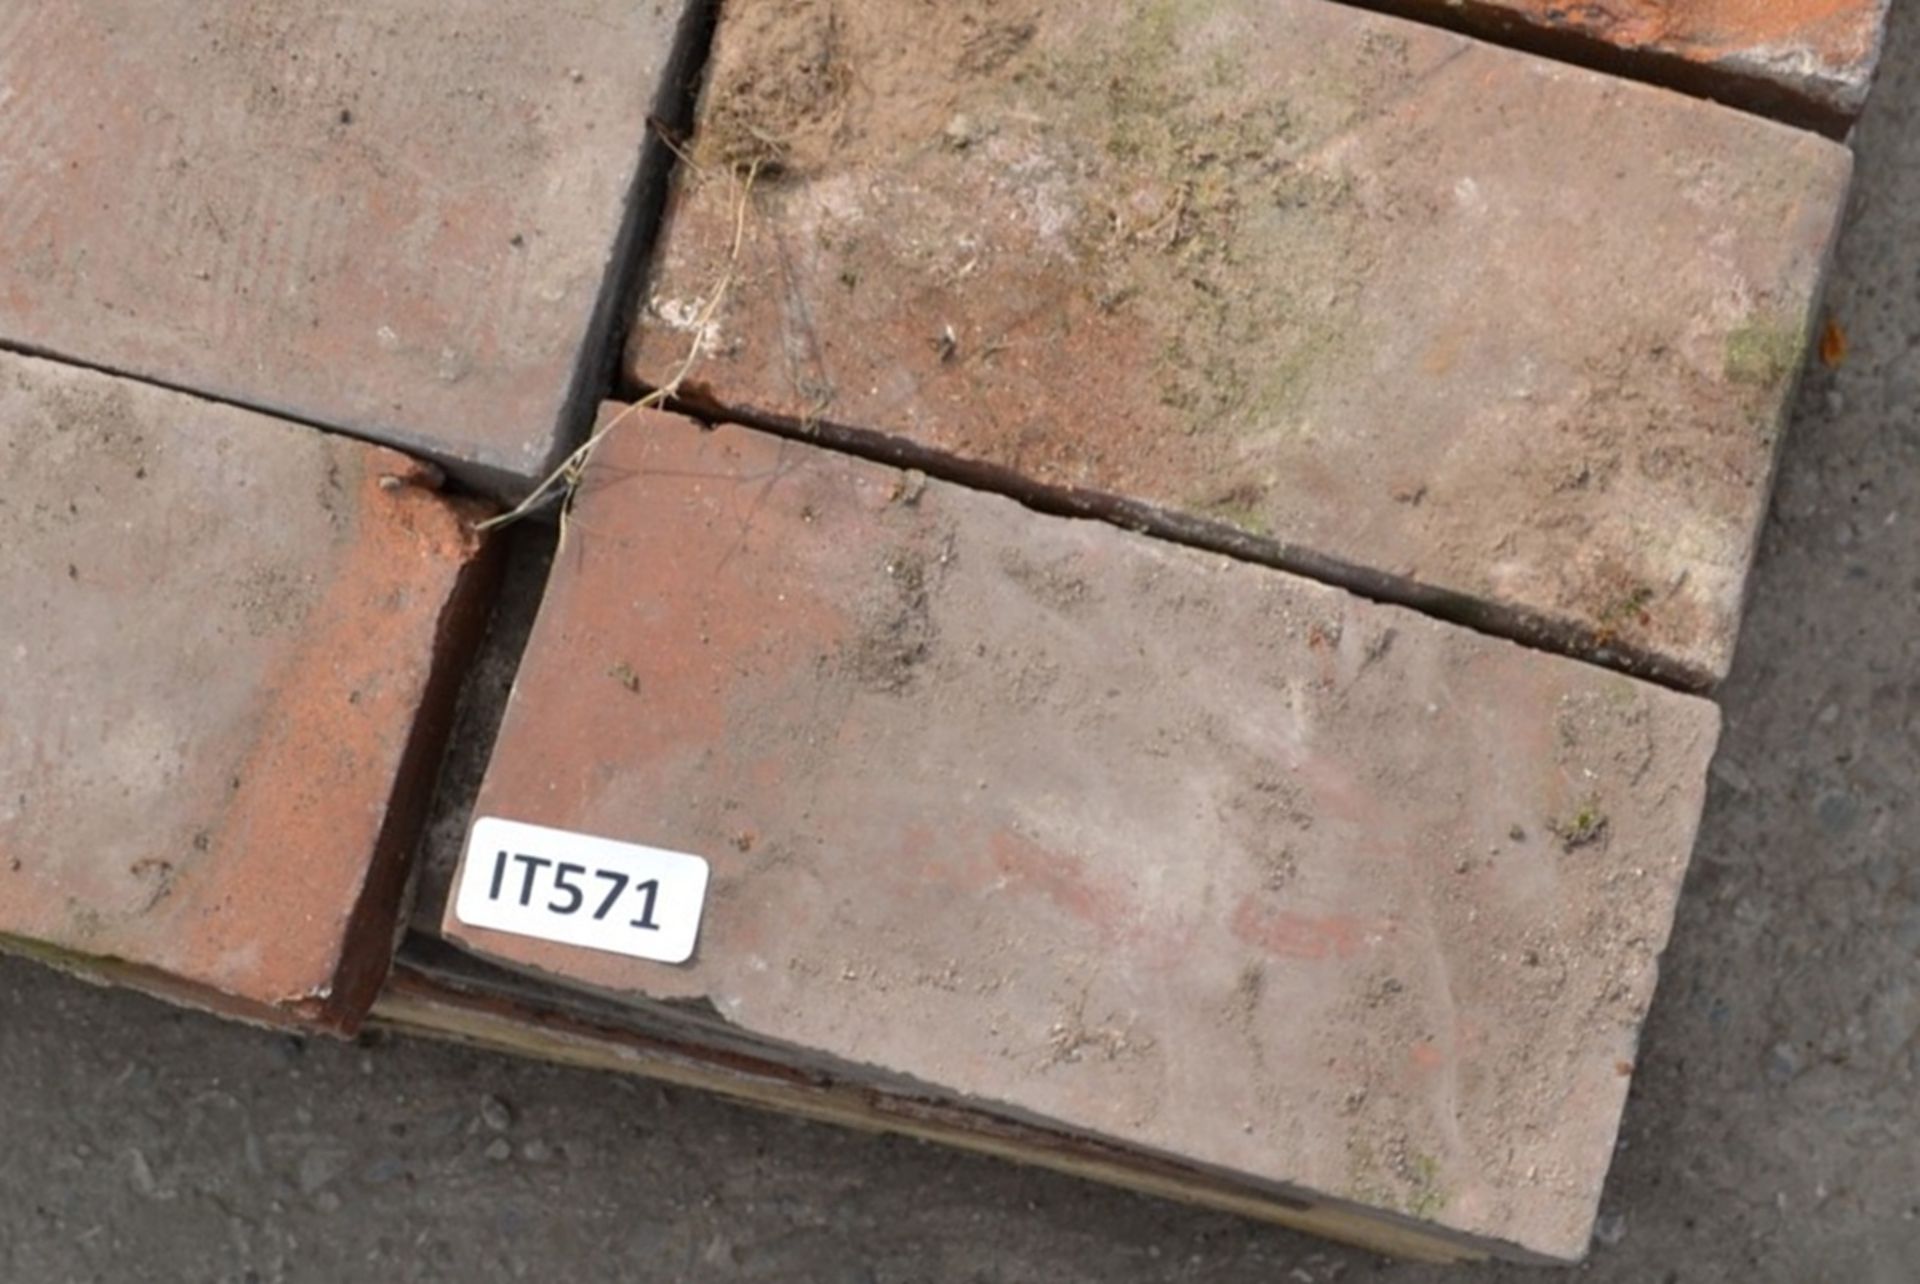 1 x Pallet Of Reclaimed Bricks - Approx 120 In Total - Dimensions: 25 x 12 x 5 - Ref: IT571 - - Image 3 of 3